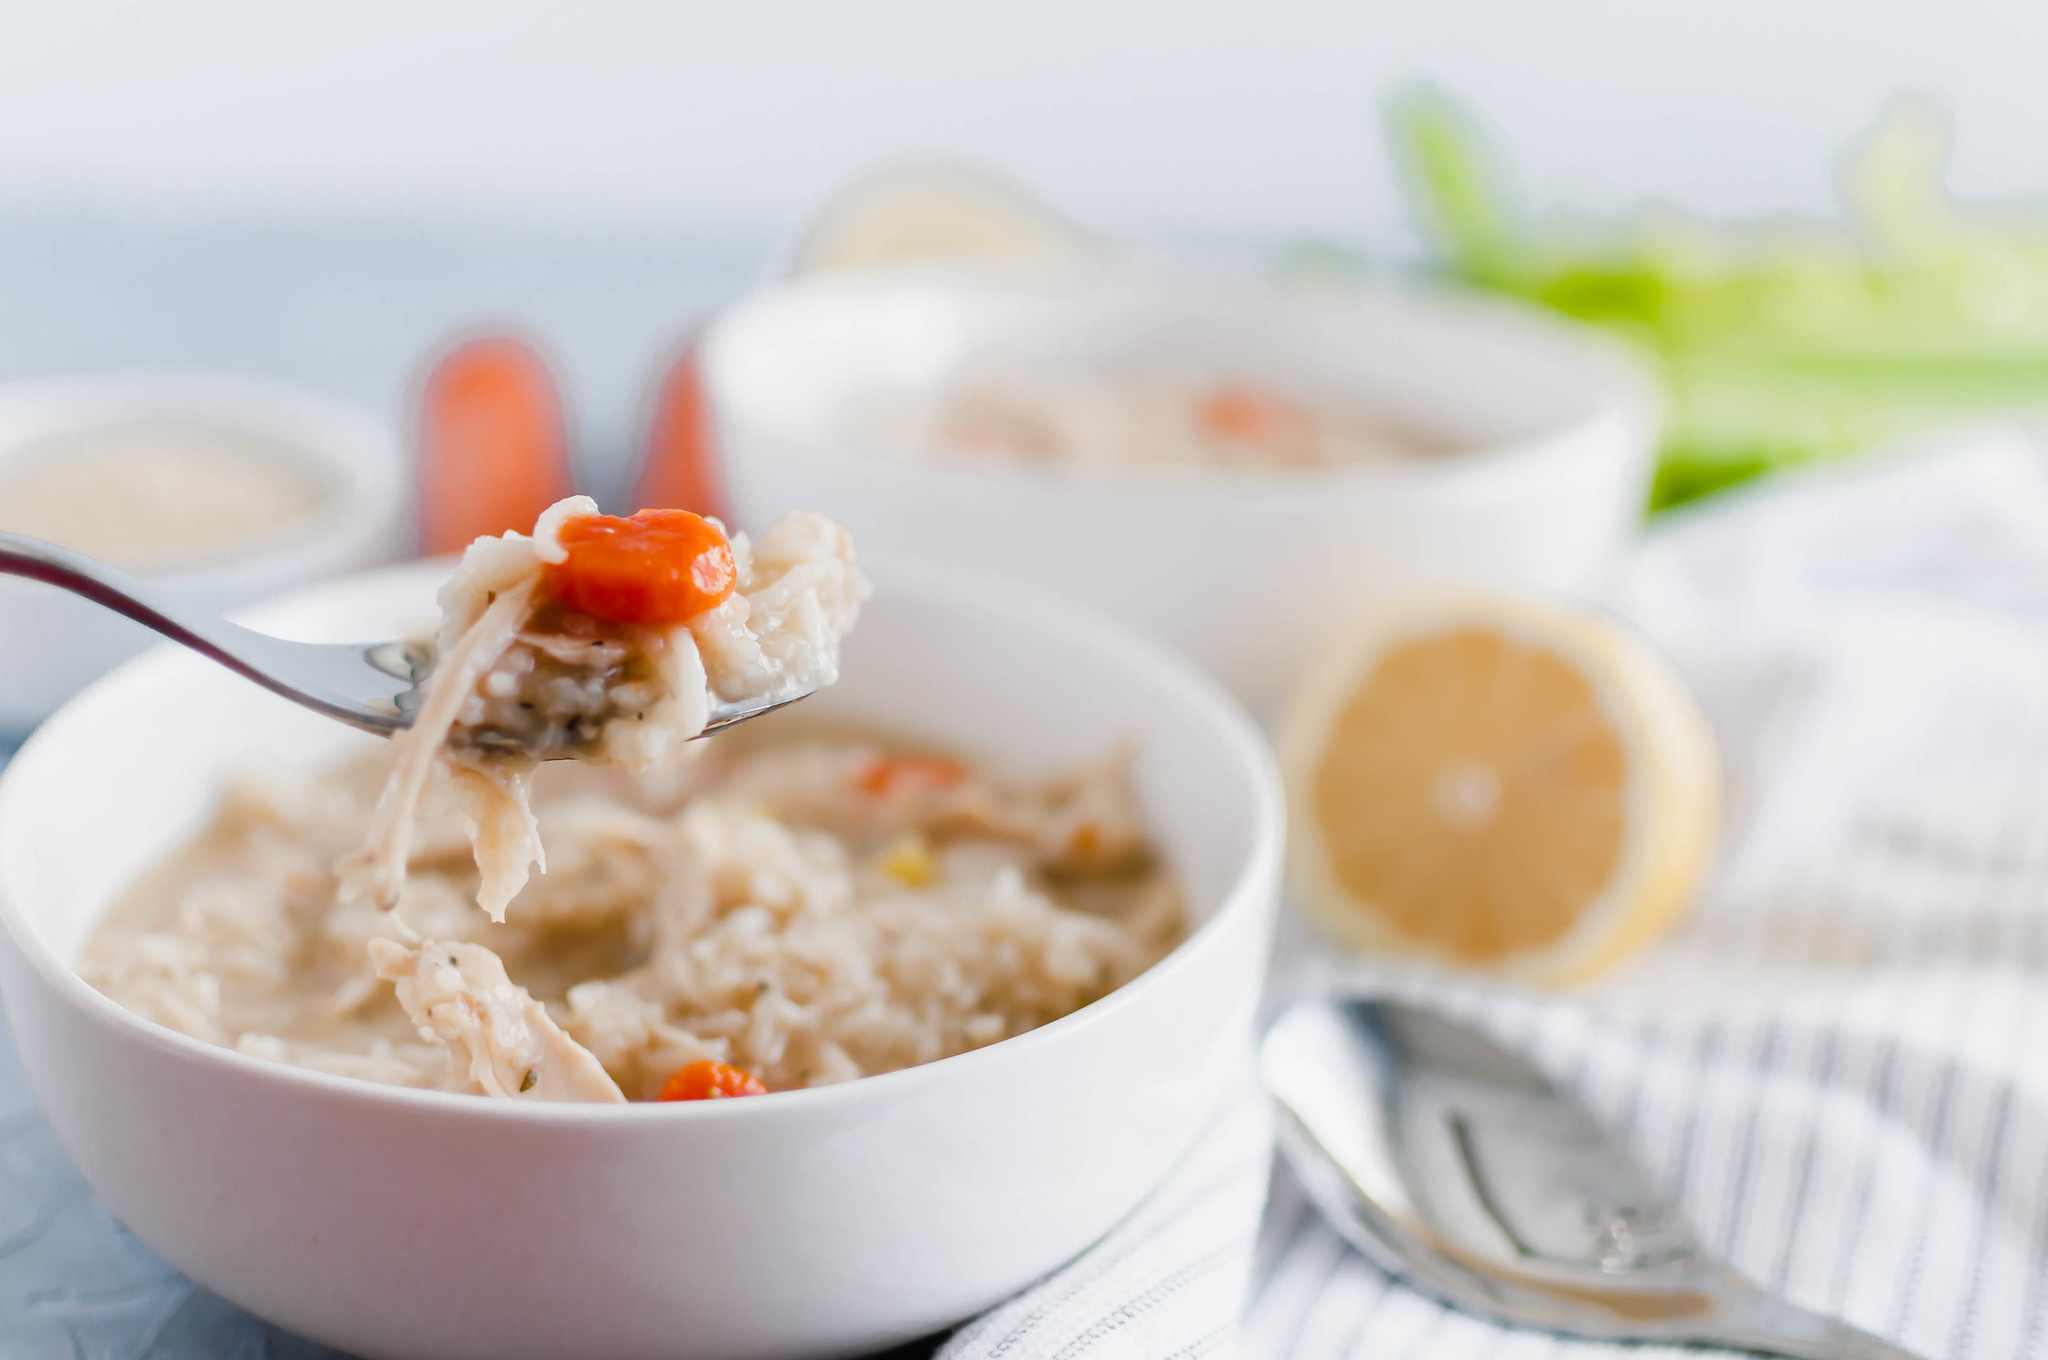 Need something warm and cozy? Feeling under the weather? This Instant Pot Chicken Rice Soup is the perfect soup to warm you up or help heal you. Simple ingredients, simple preparation and just a few minutes until soup is on the table.